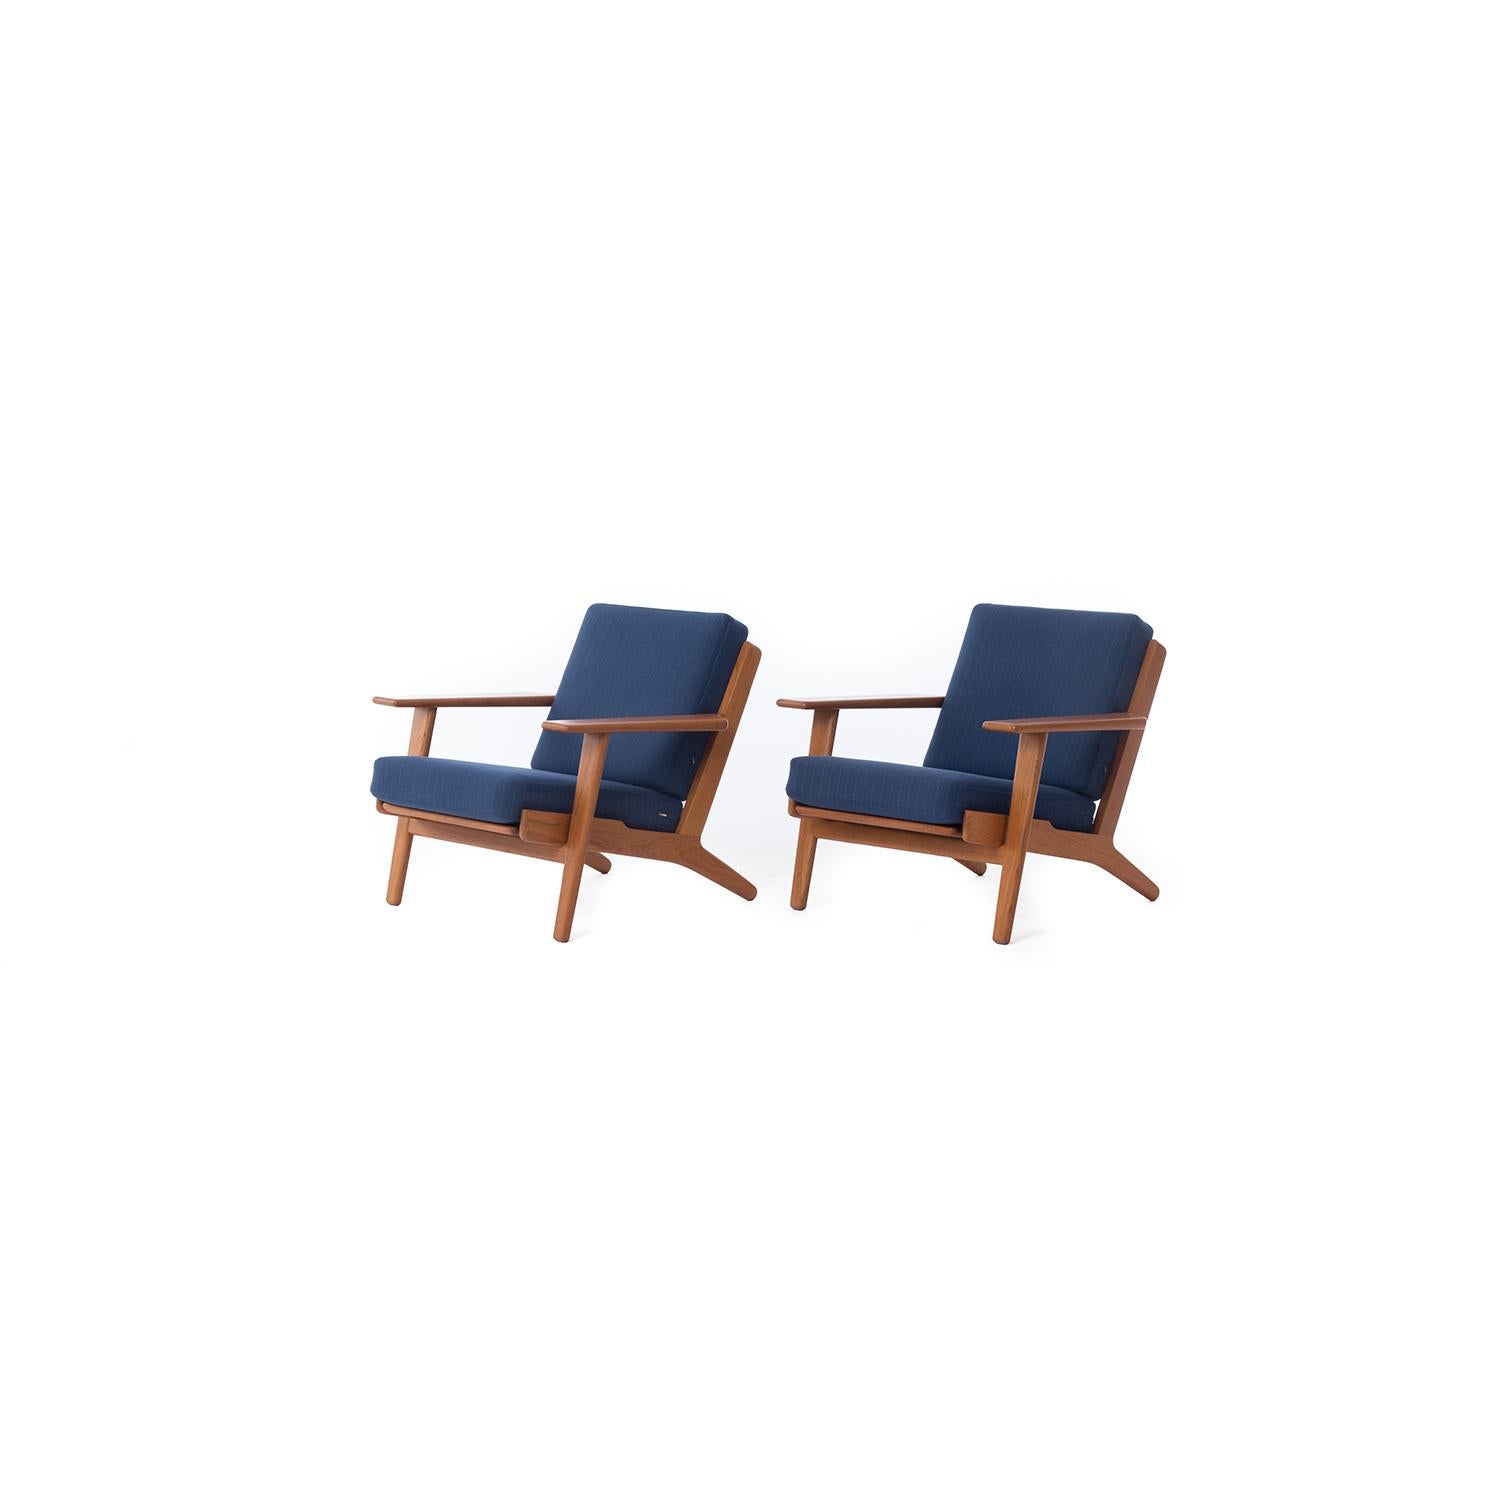 An original set of GE290 lounge chairs by Hans J. Wegner for GETAMA. Original sprung cushions with blue pinstripe wool upholstery. 
Pristine condition. 

Professional, skilled furniture restoration is an integral part of what we do every day. Our